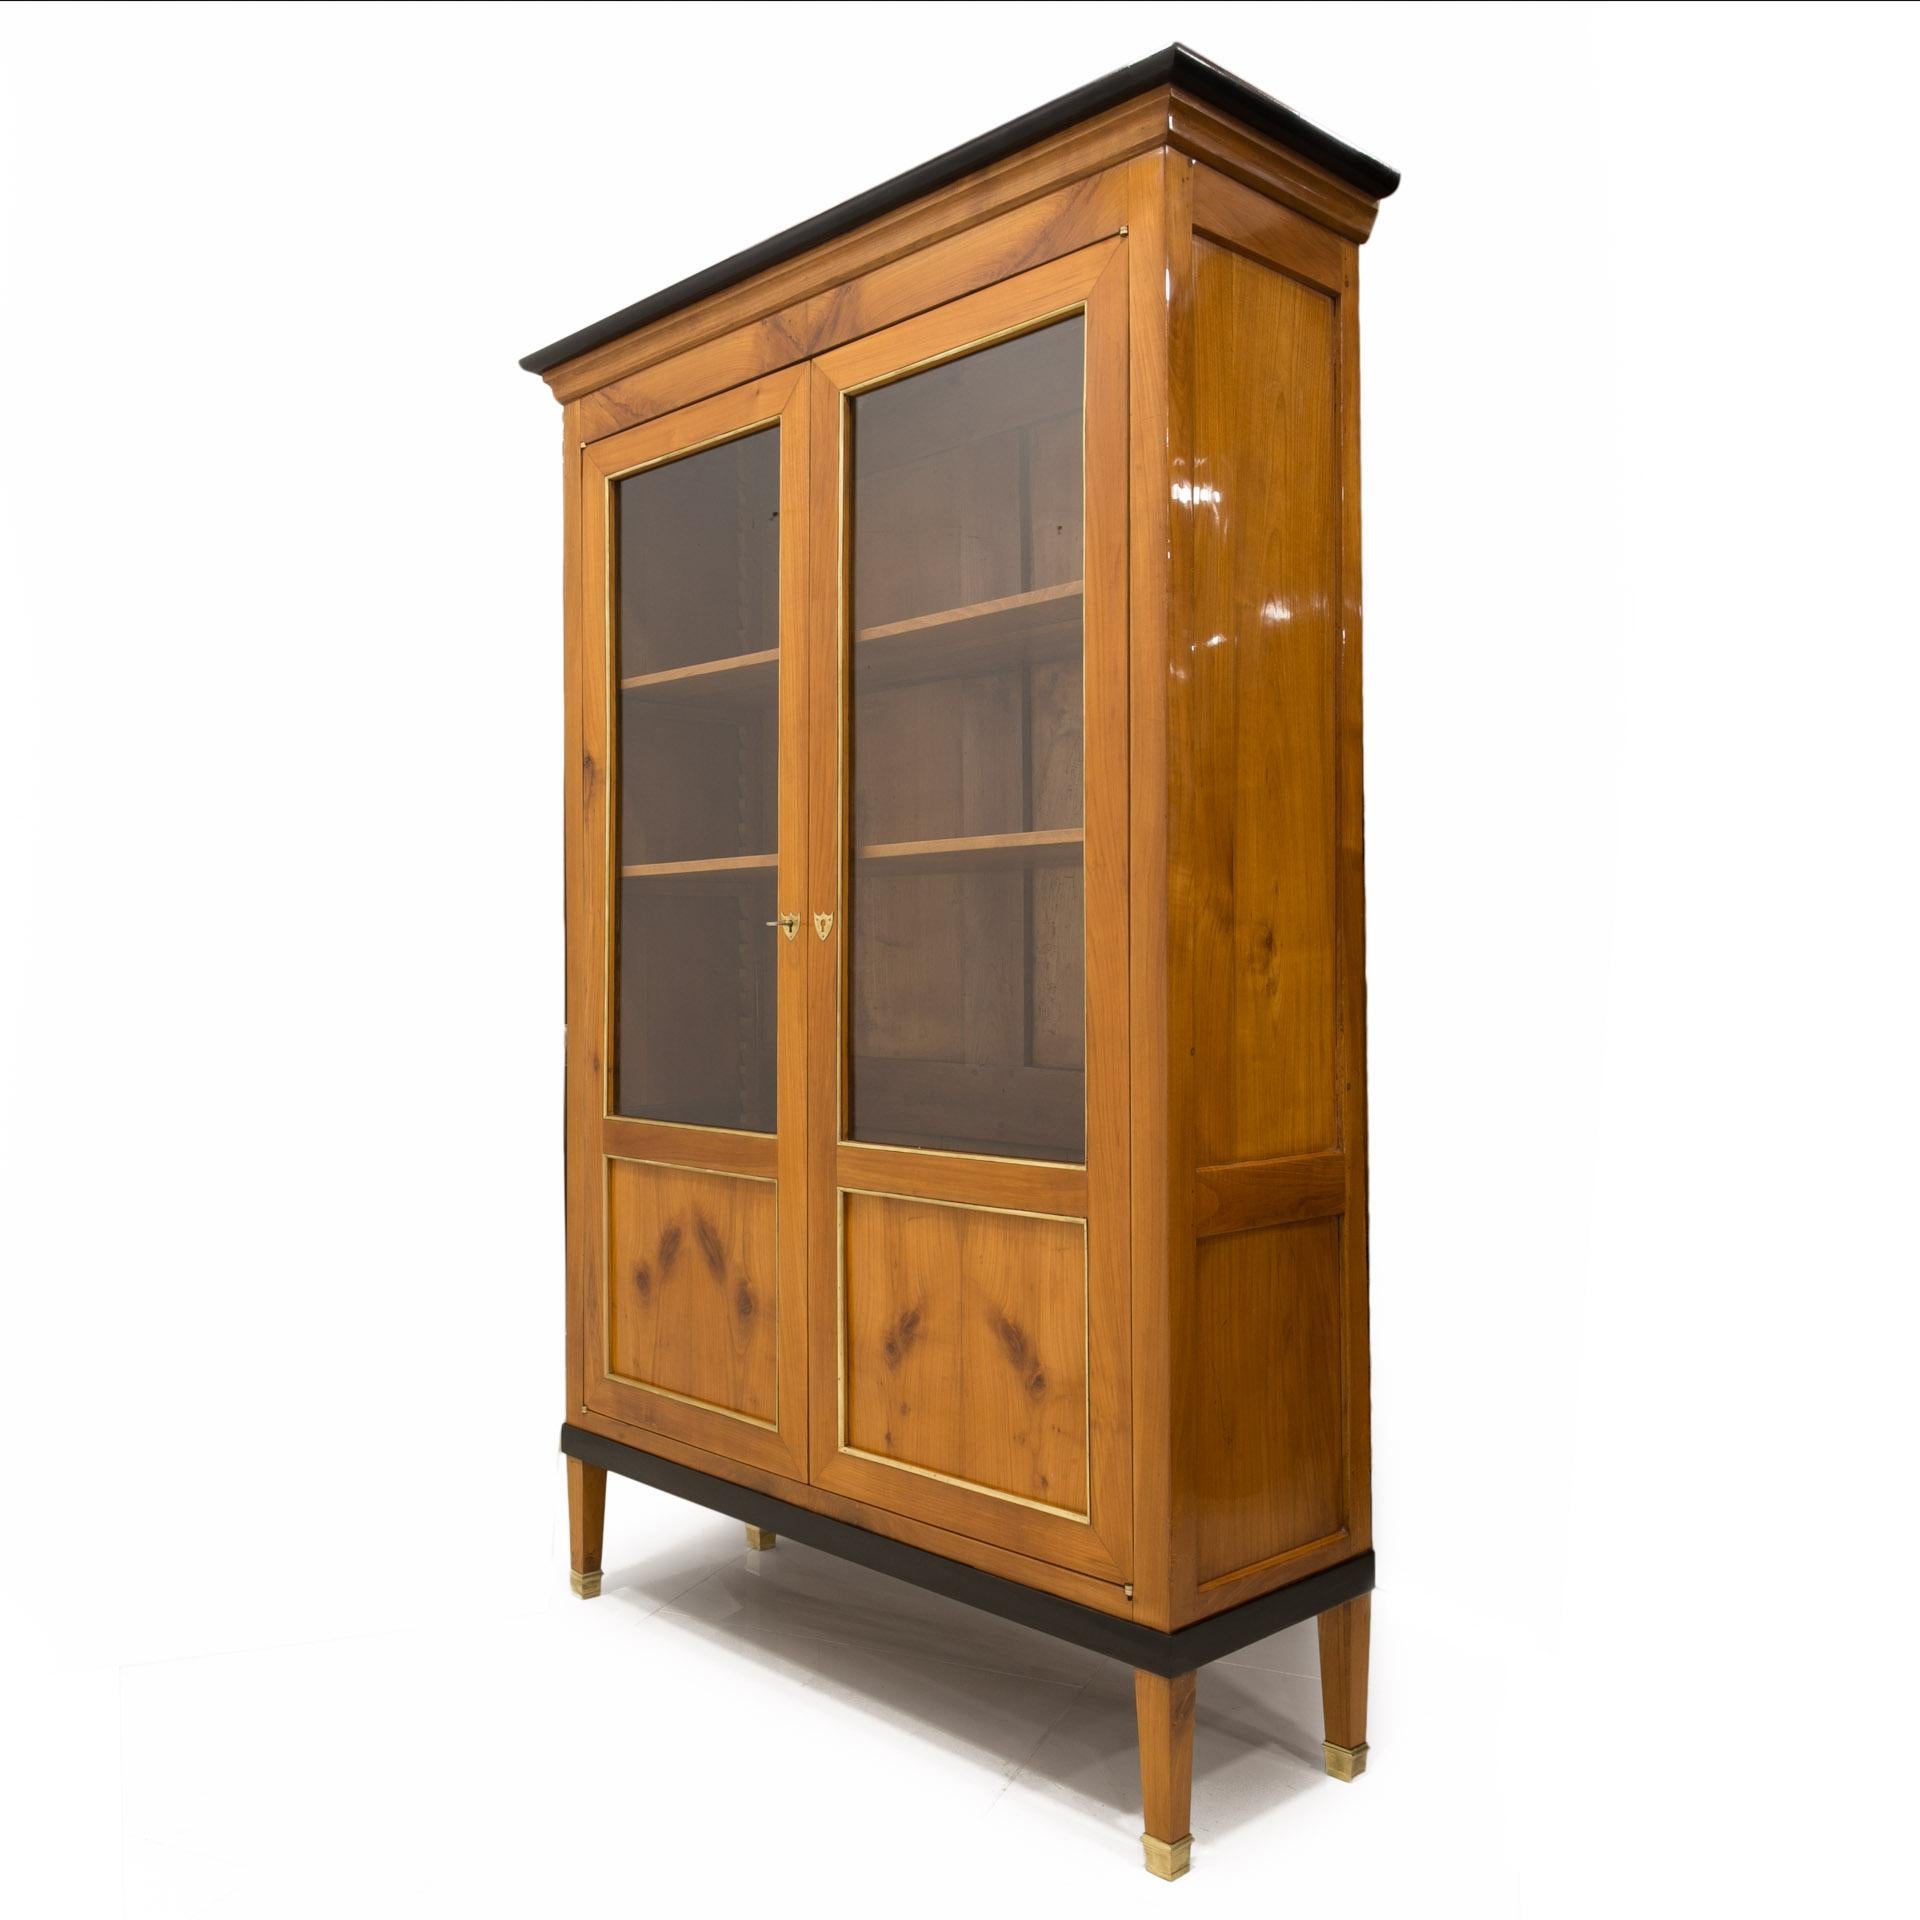 This beautiful cherrywood vitrine comes from Germany from 19th century (the Biedermeier period). The construction is made of solid cherrywood. The piece features practical shelves with adjustable height system. It was professionally renovated,